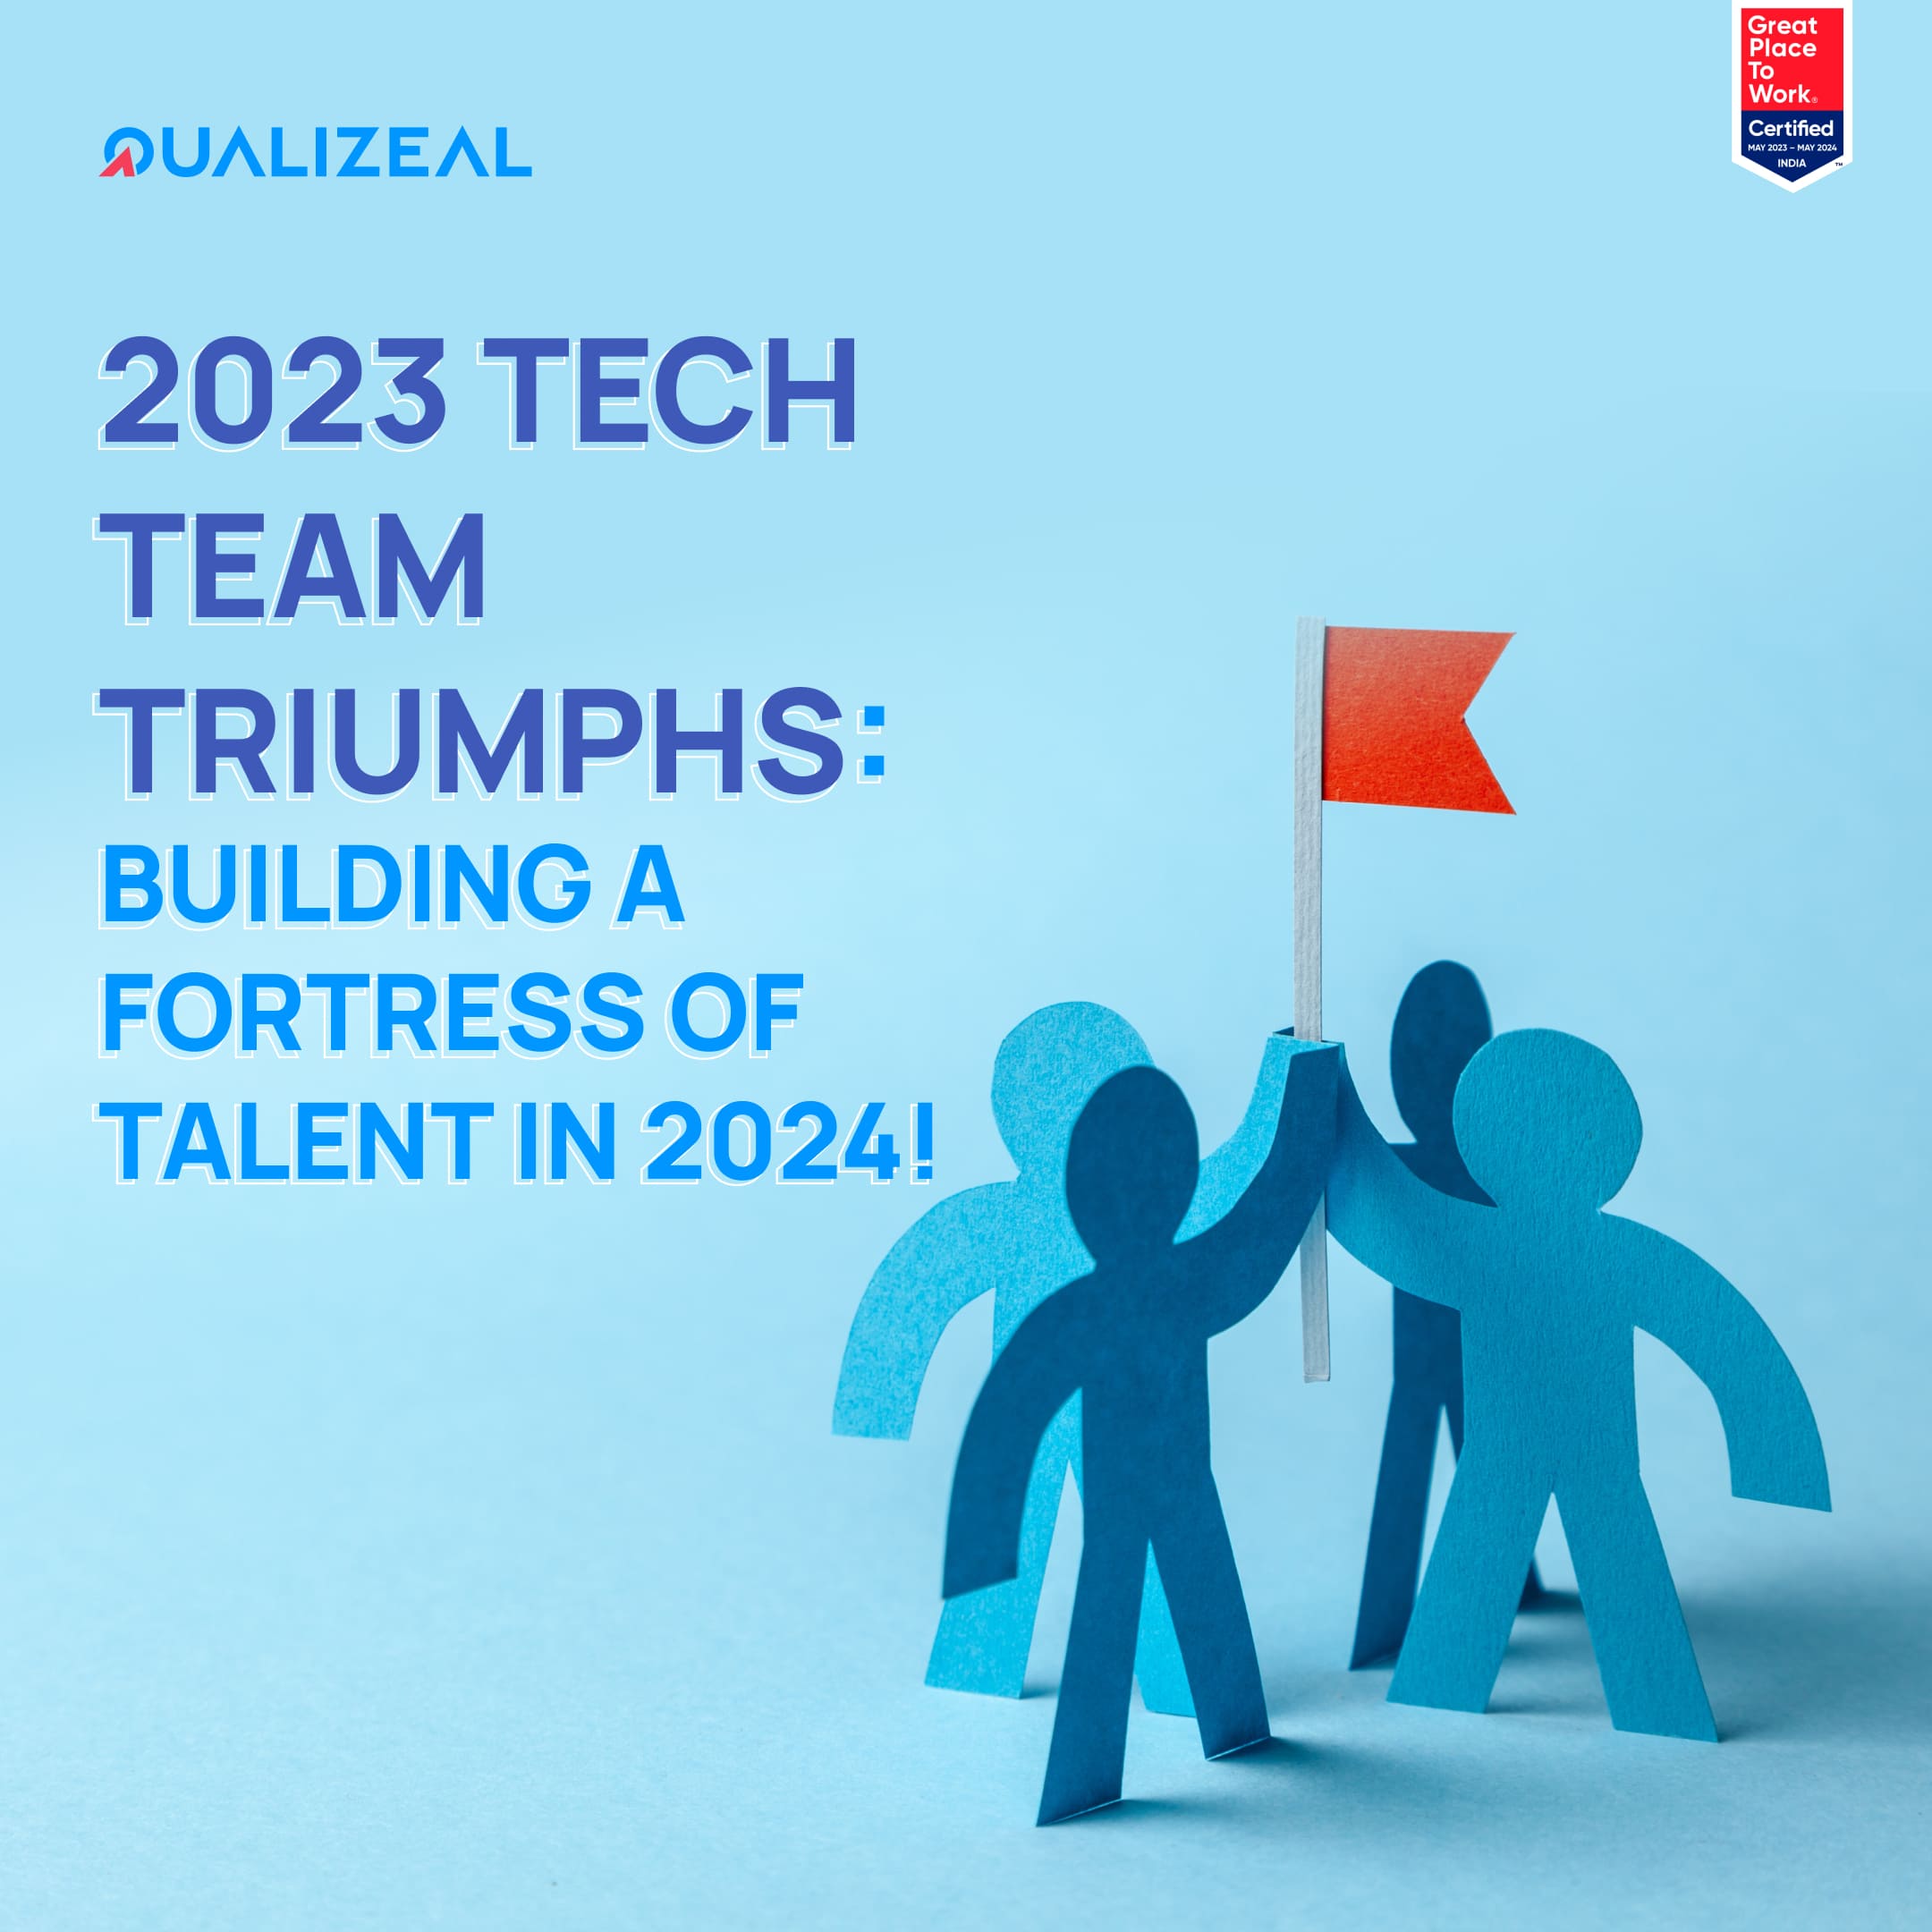 Building A Fortress Of Talent In 2024